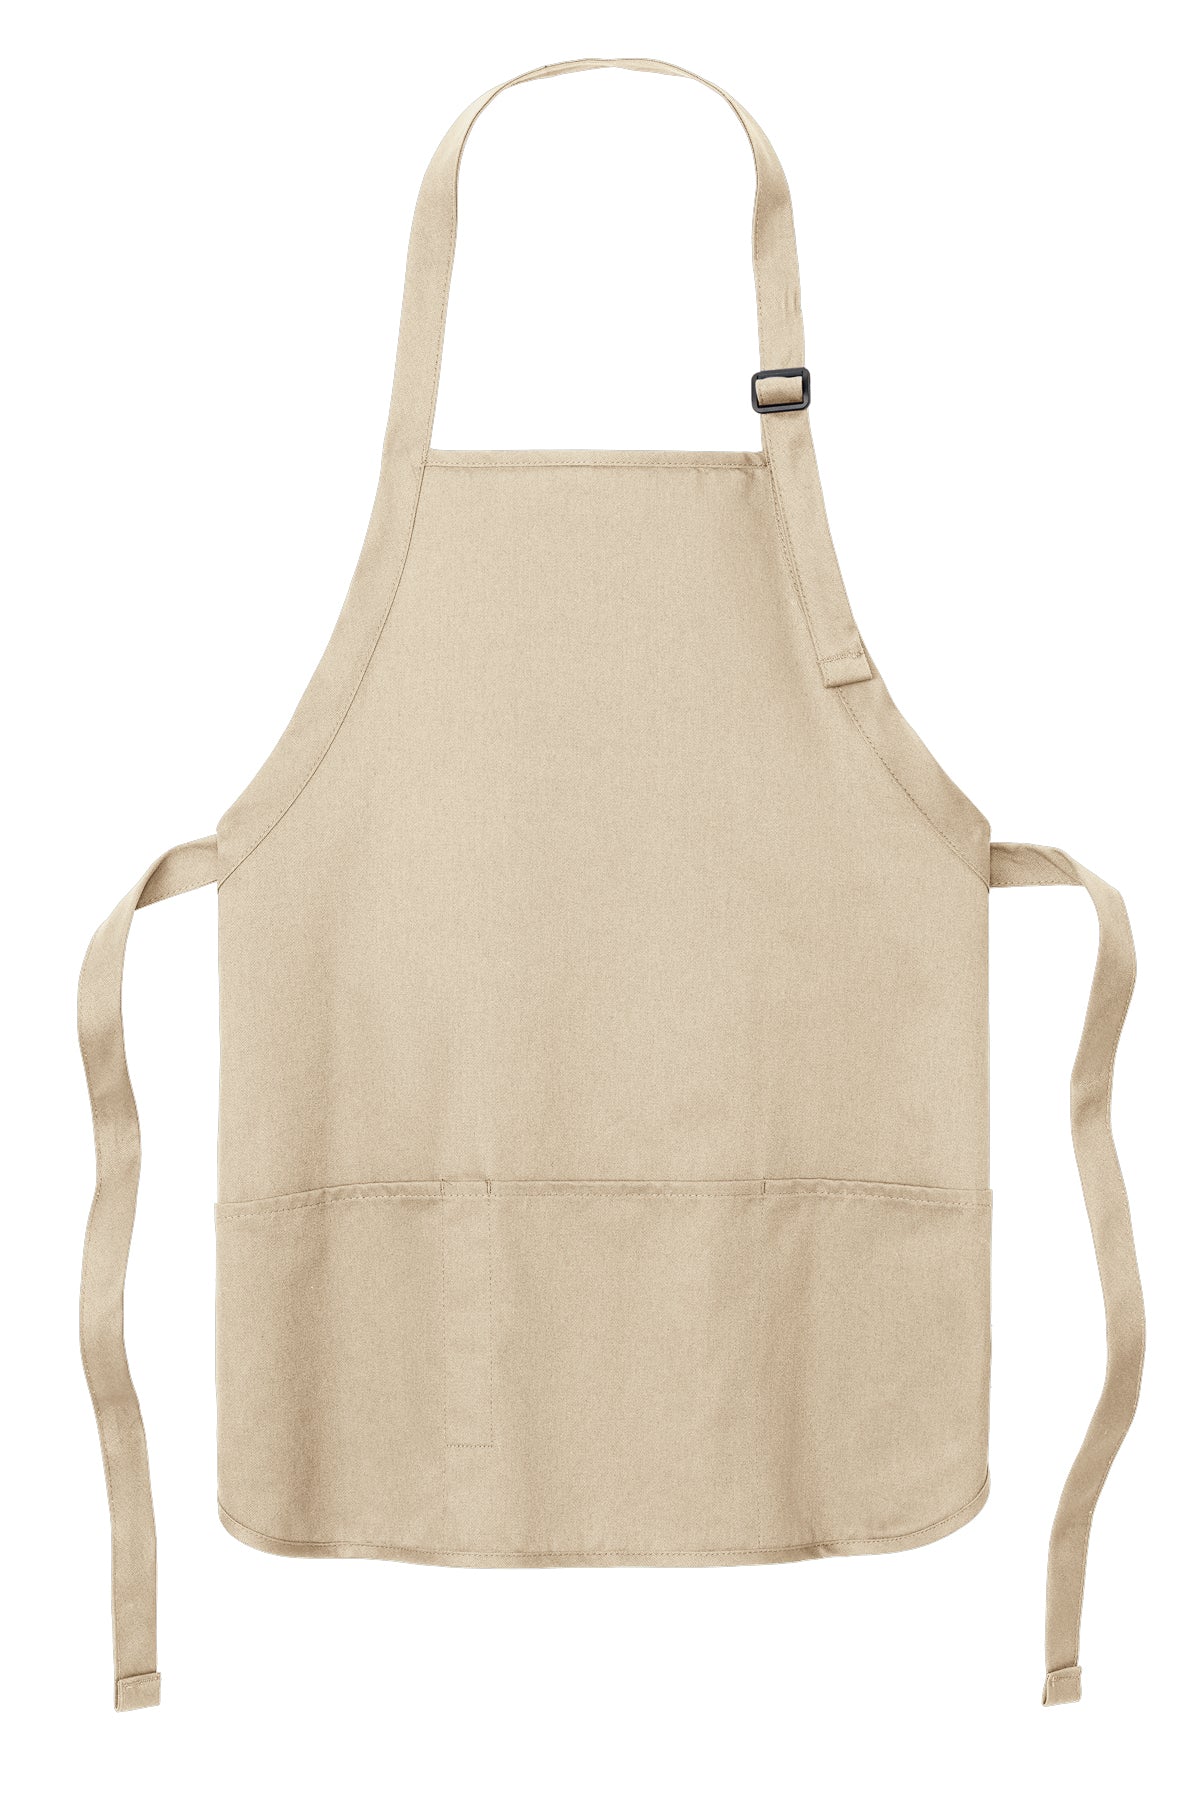 Port Authority Medium-Length Apron with Pouch Pockets A510 Stone